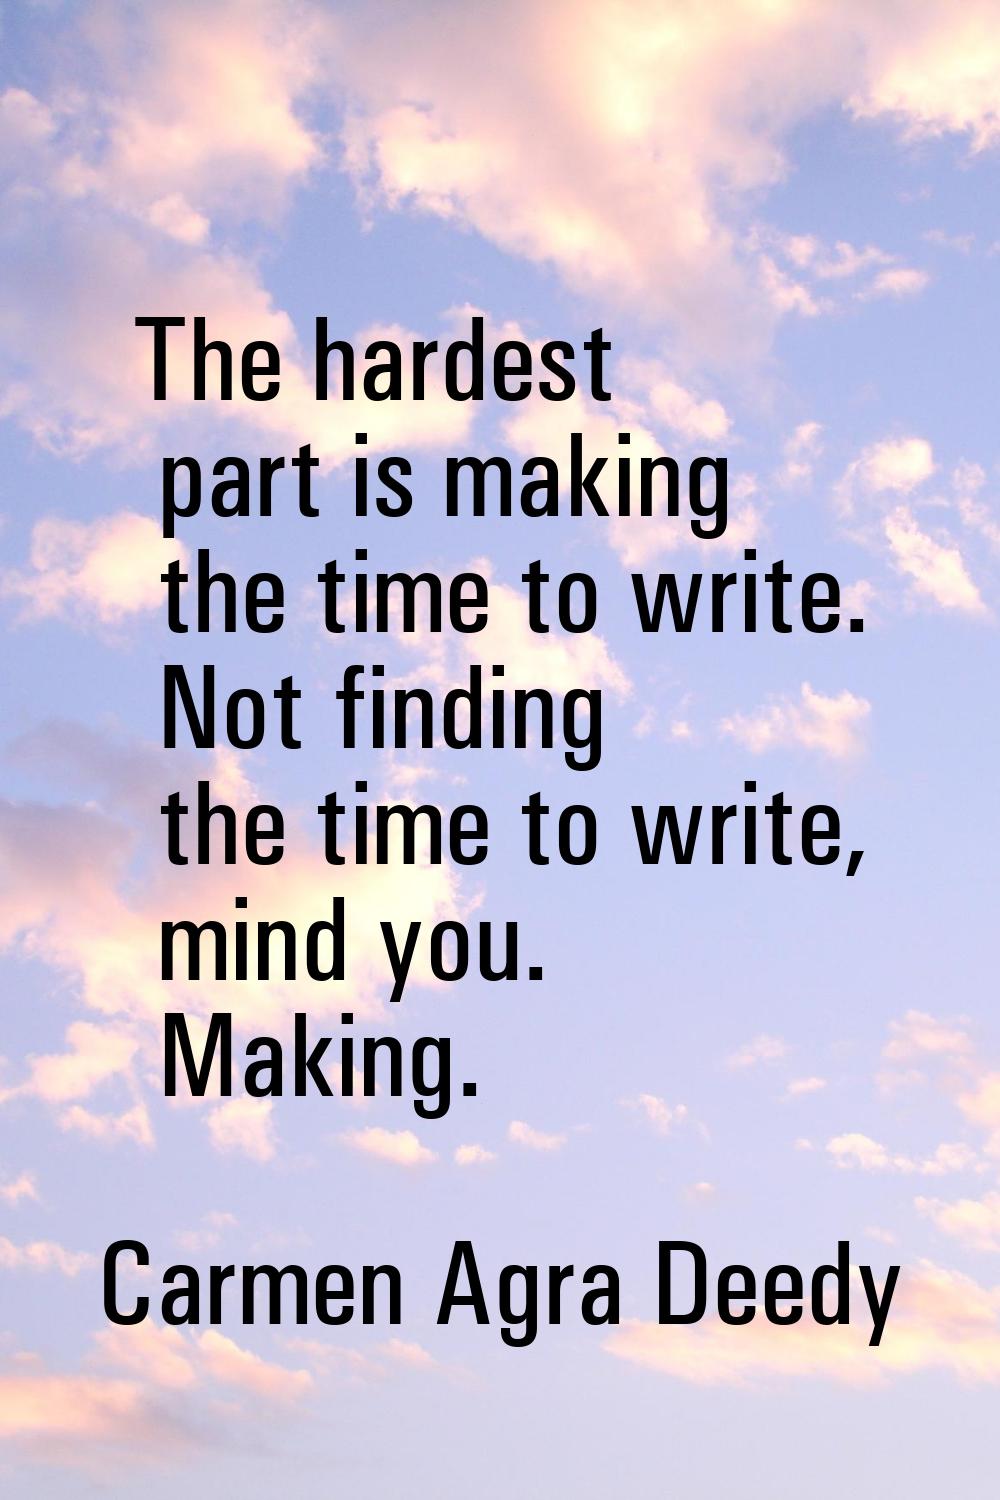 The hardest part is making the time to write. Not finding the time to write, mind you. Making.